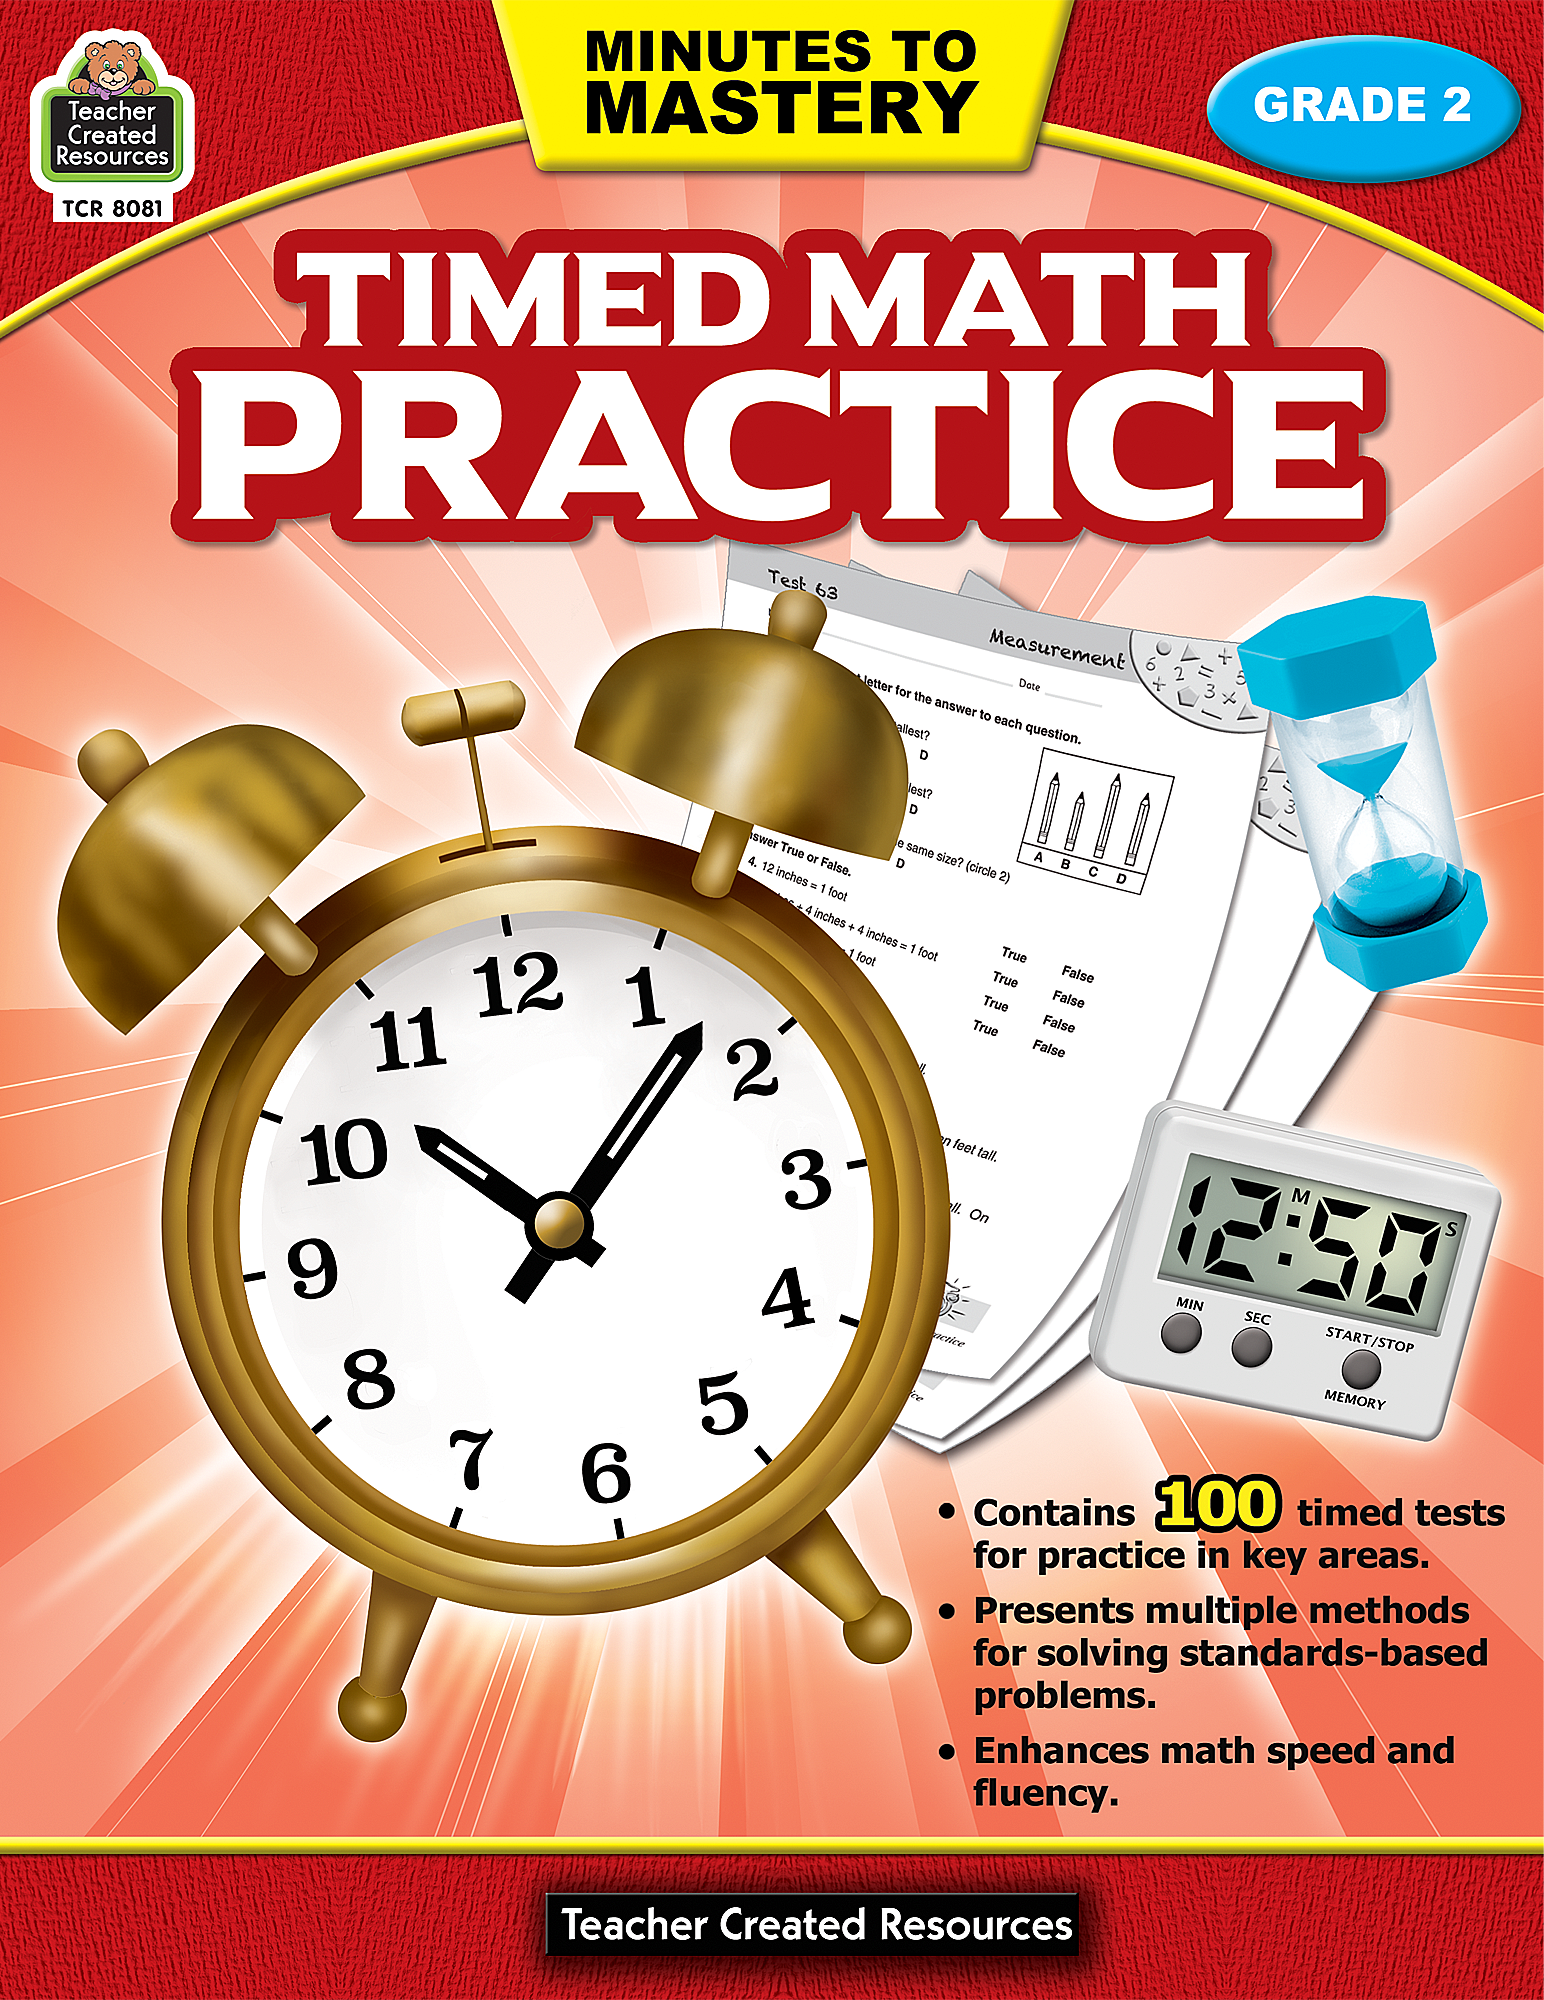 Minutes to Mastery - Timed Math Practice (Gr. 2)